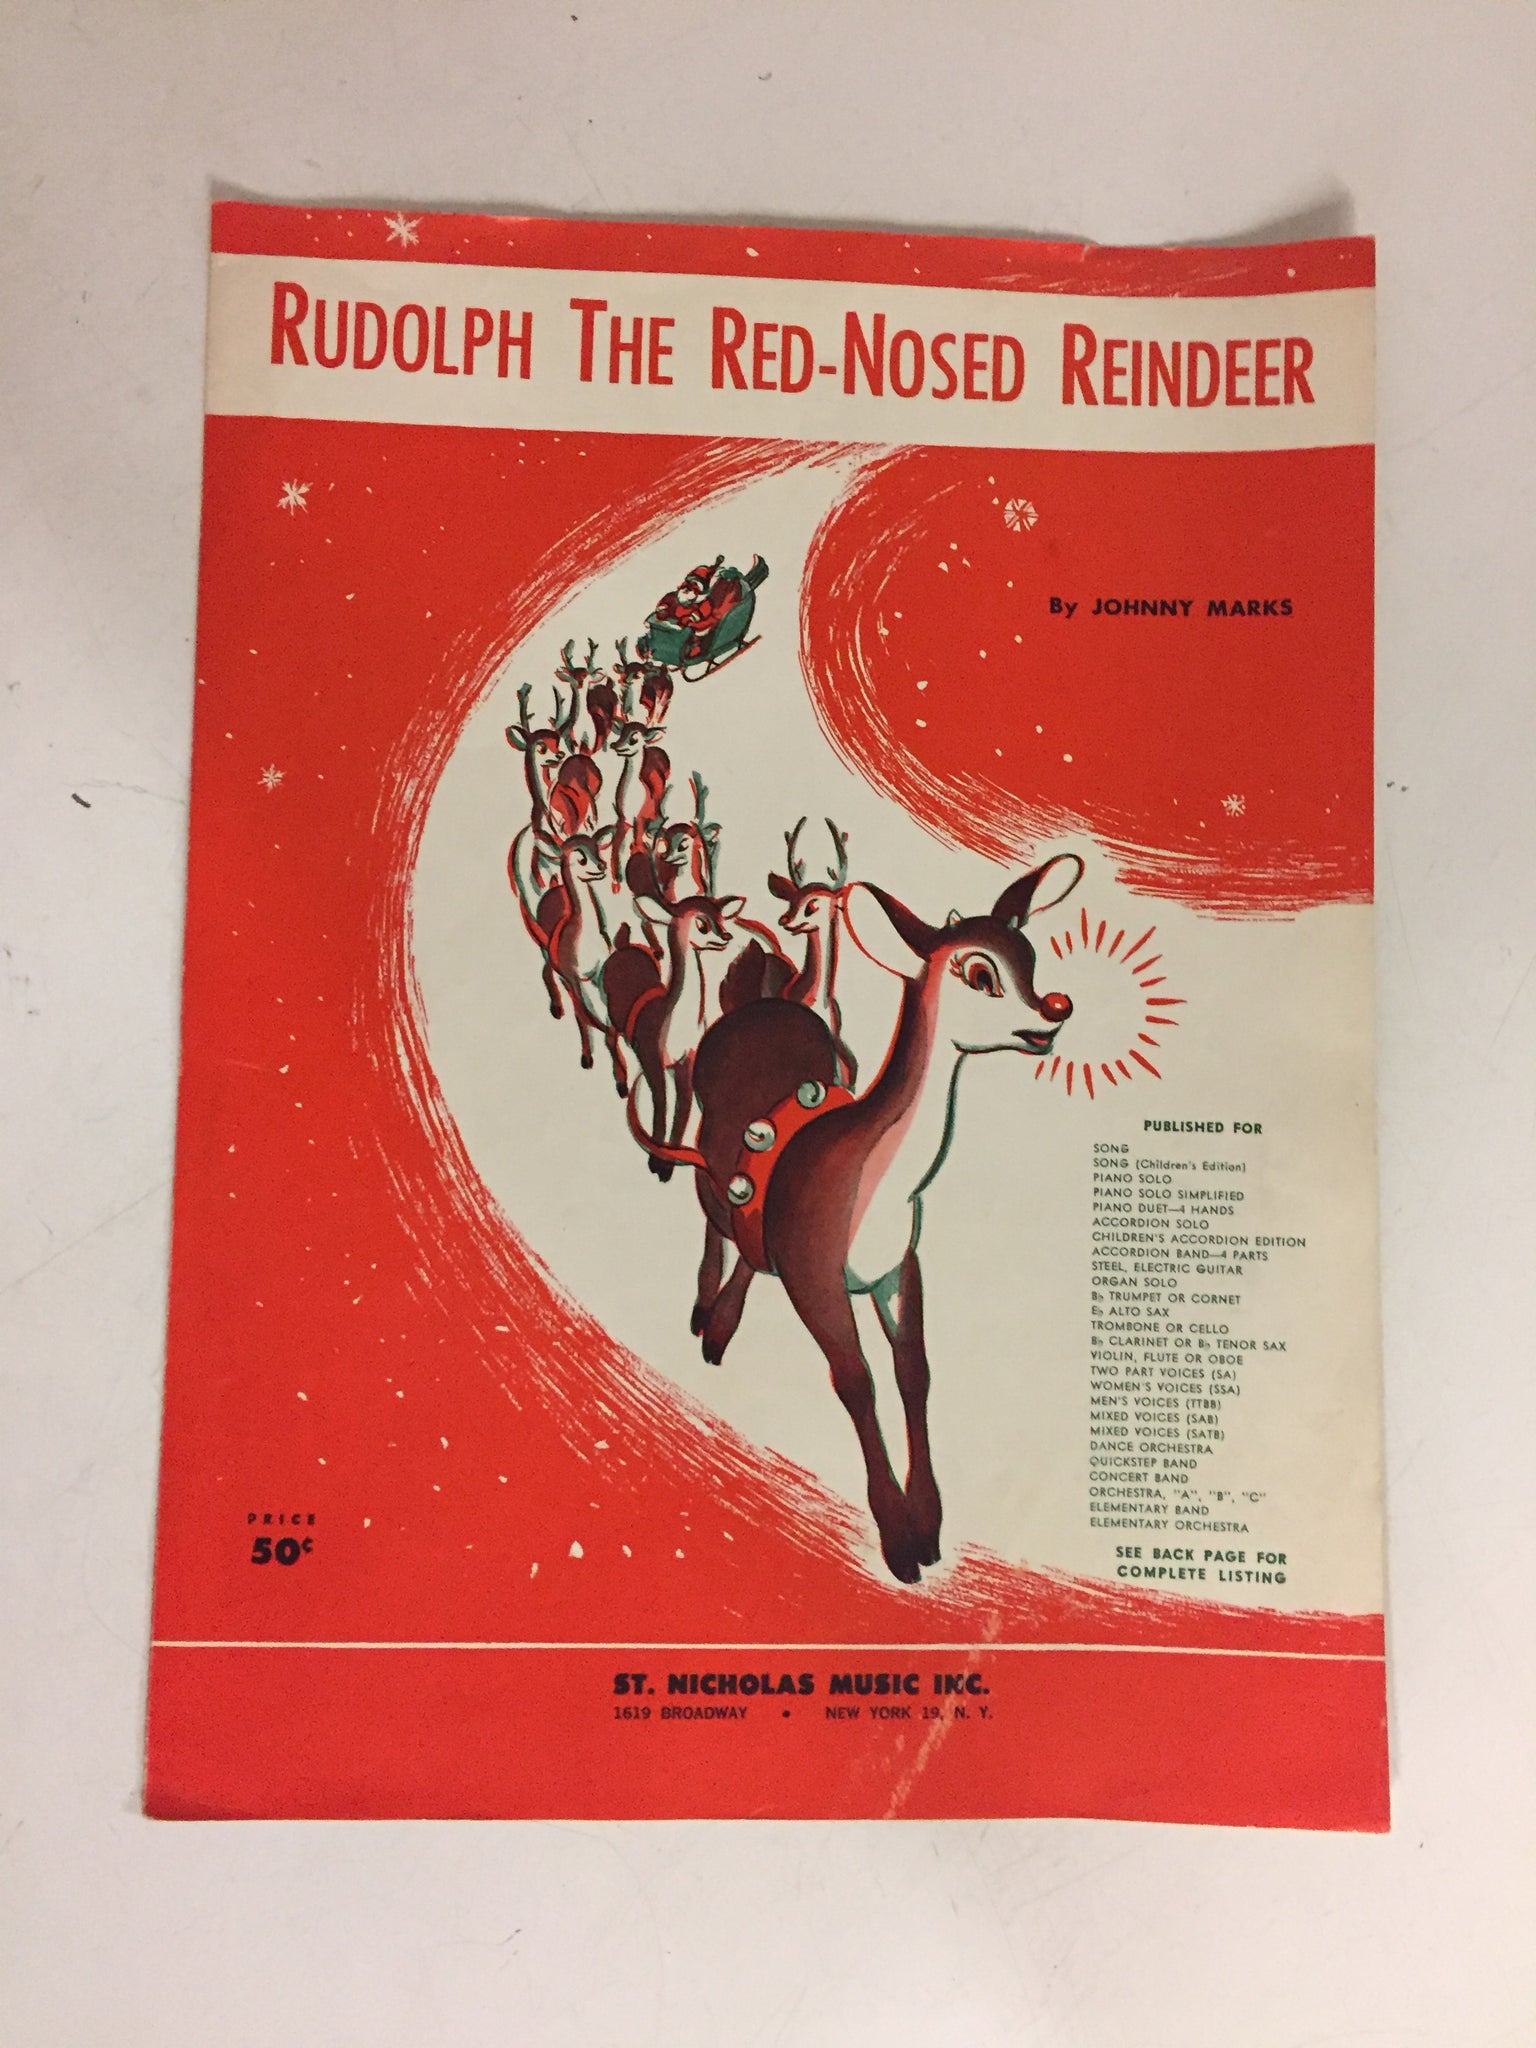 Vintage 1949 St Nicholas Music Rudolph the Red-Nosed Reindeer Sheet Music